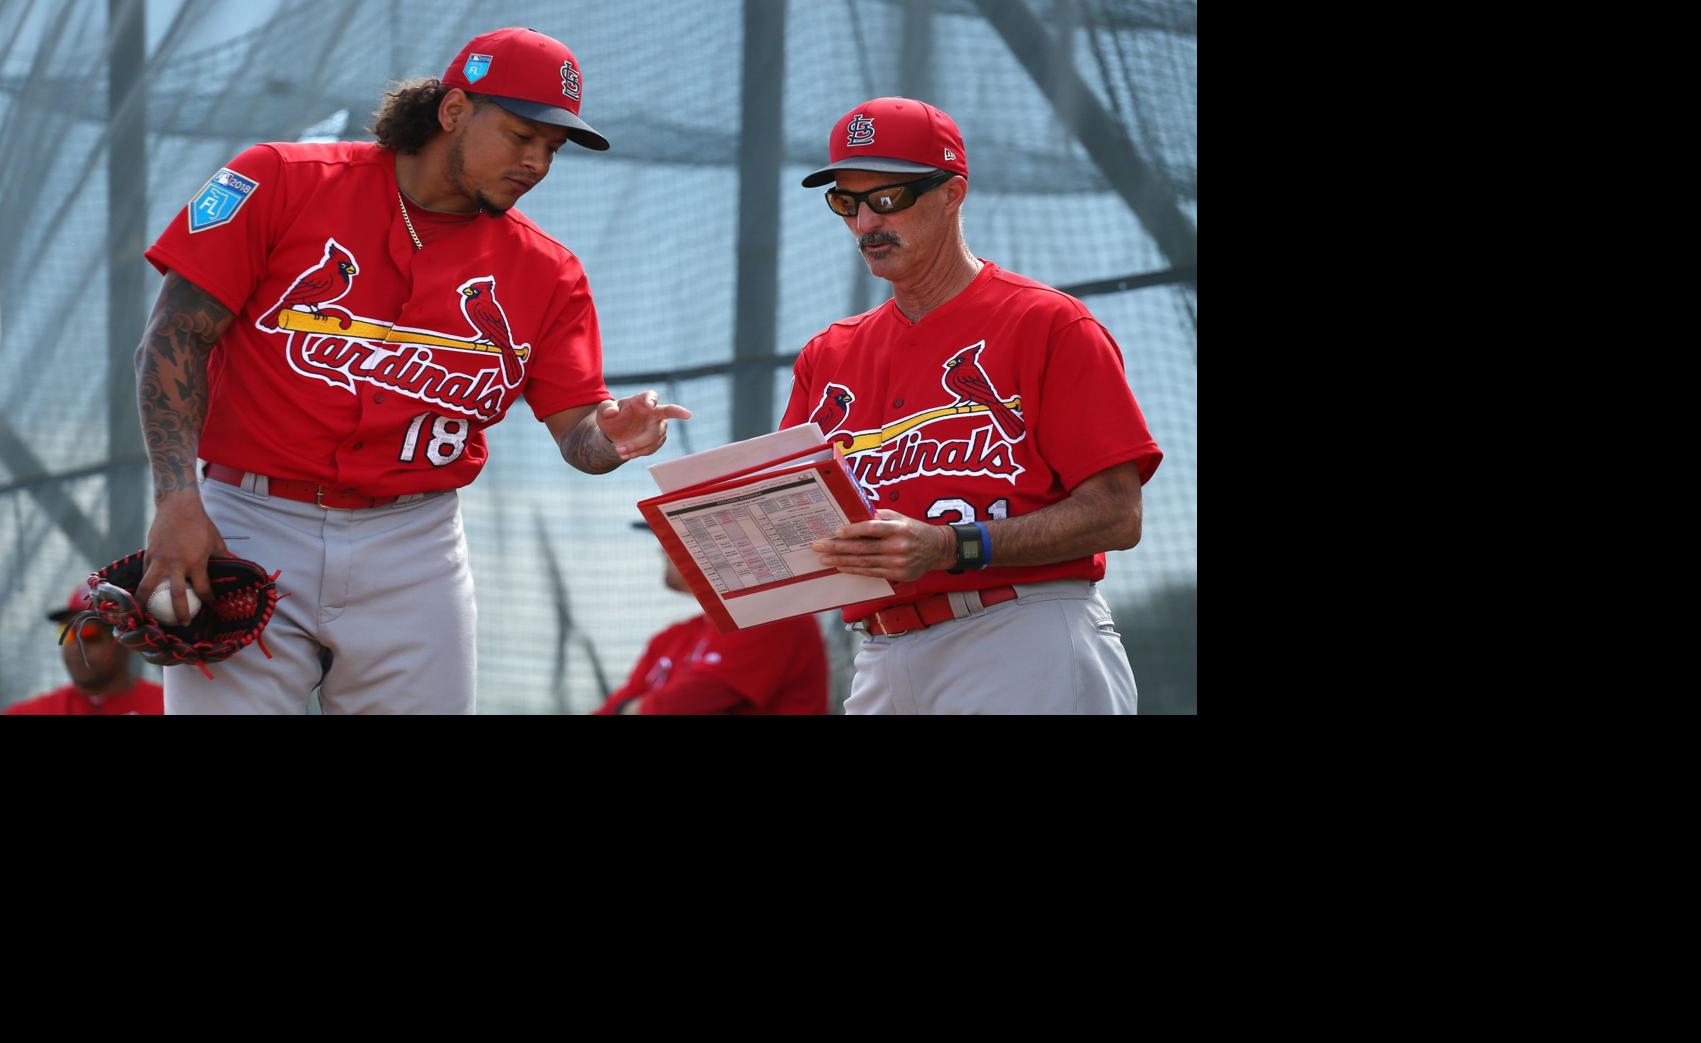 Hochman: What stat does Cards pitching coach Maddux refer to as 'telltale?